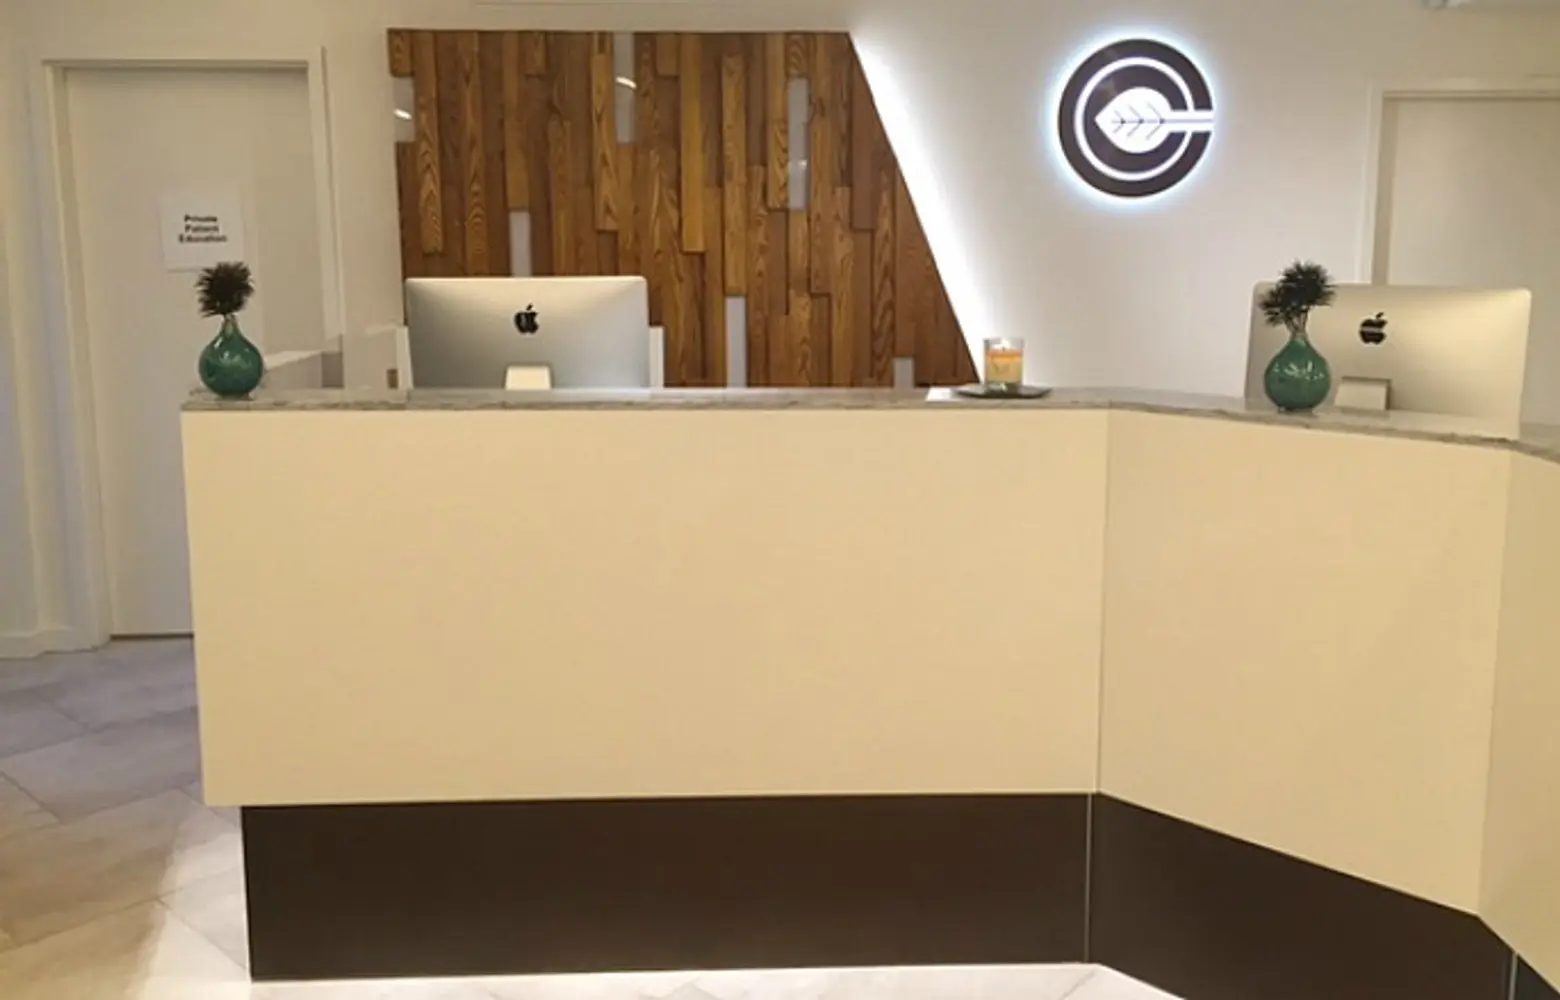 Inside NYC’s First Medical Marijuana Dispensary; Rug Alarm Clock Forces You Out of Bed